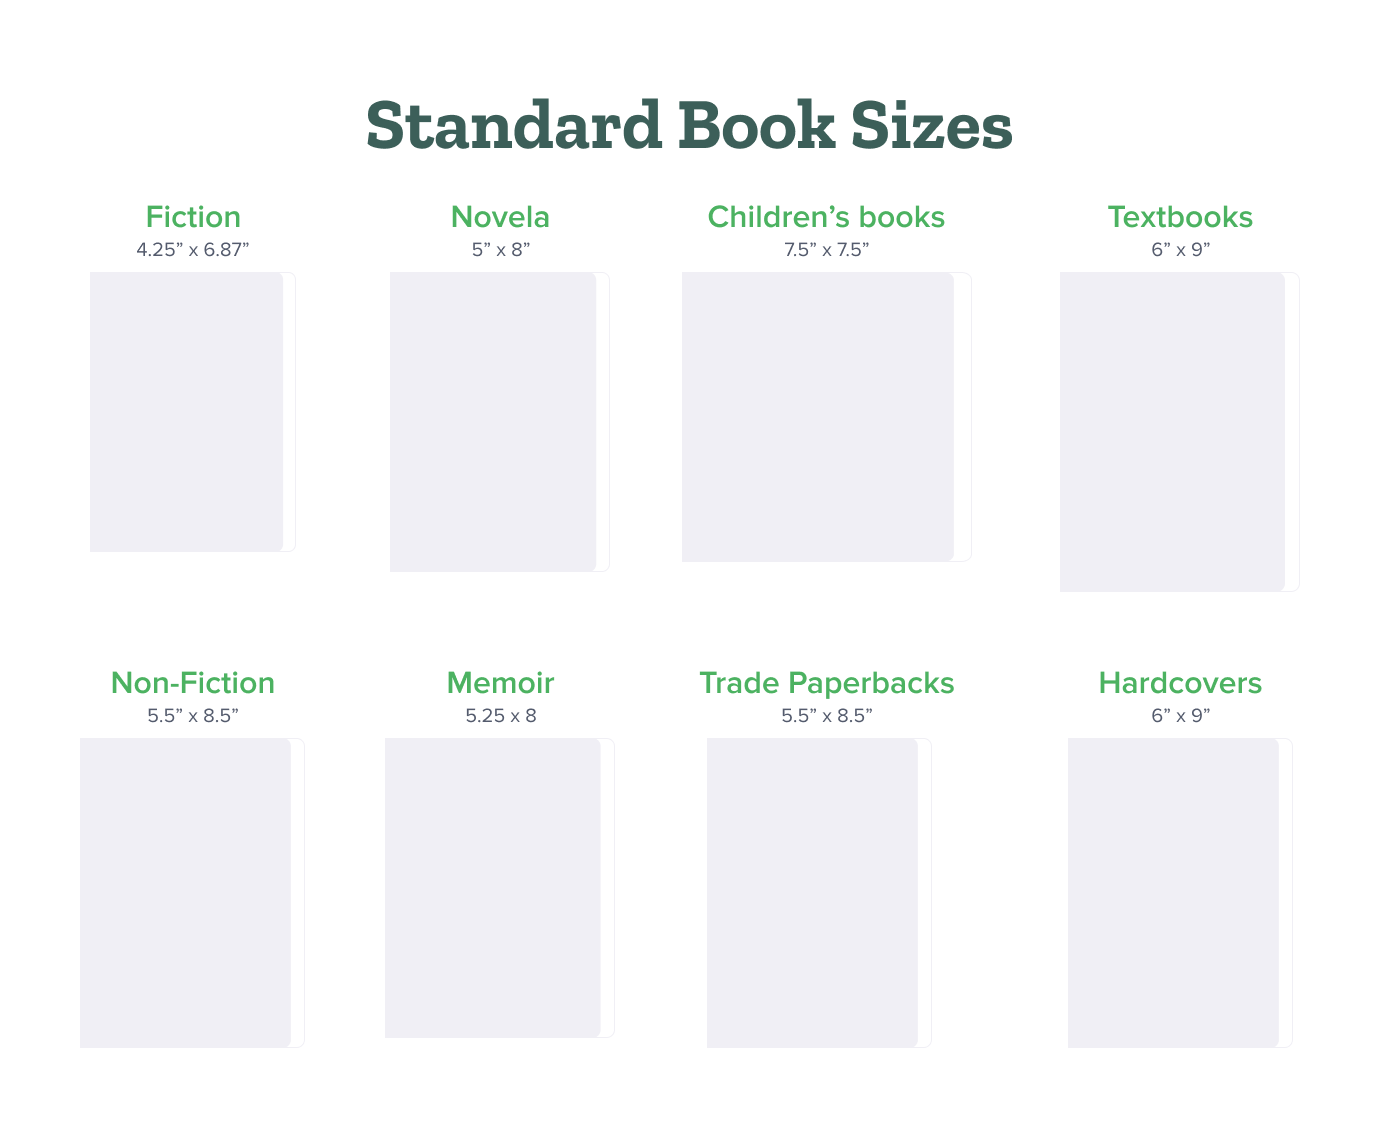 The image shows the standard book sizes for important genres. 